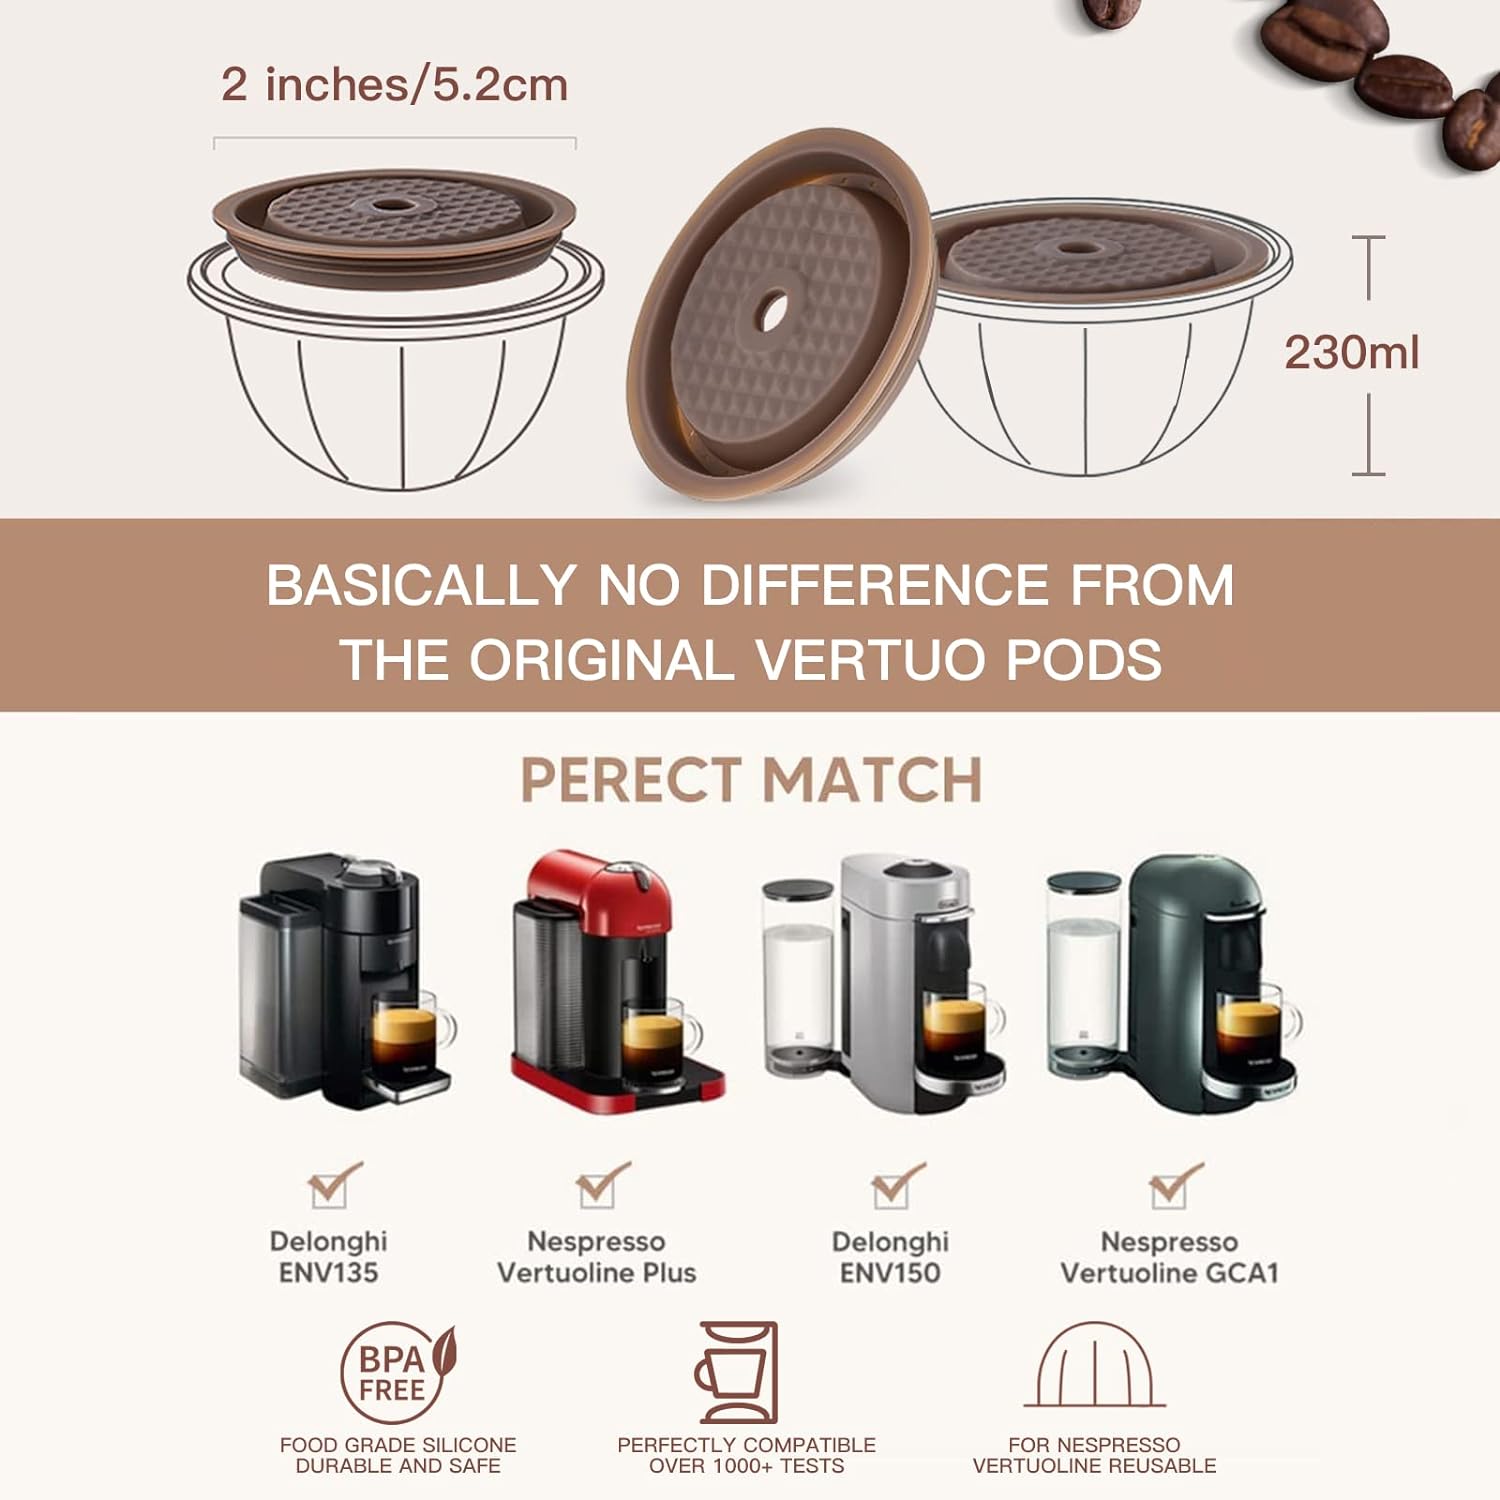 Reusable Vertuo Pods(5Pcs), Replacement Refillable Coffee Capsules for Vertuoline and Vertuo Pod, 230 mL Coffee Pods for Nespresso Vertuo Series, with 2 Pcs Reusable Silicone Lids, Scoop, Brush